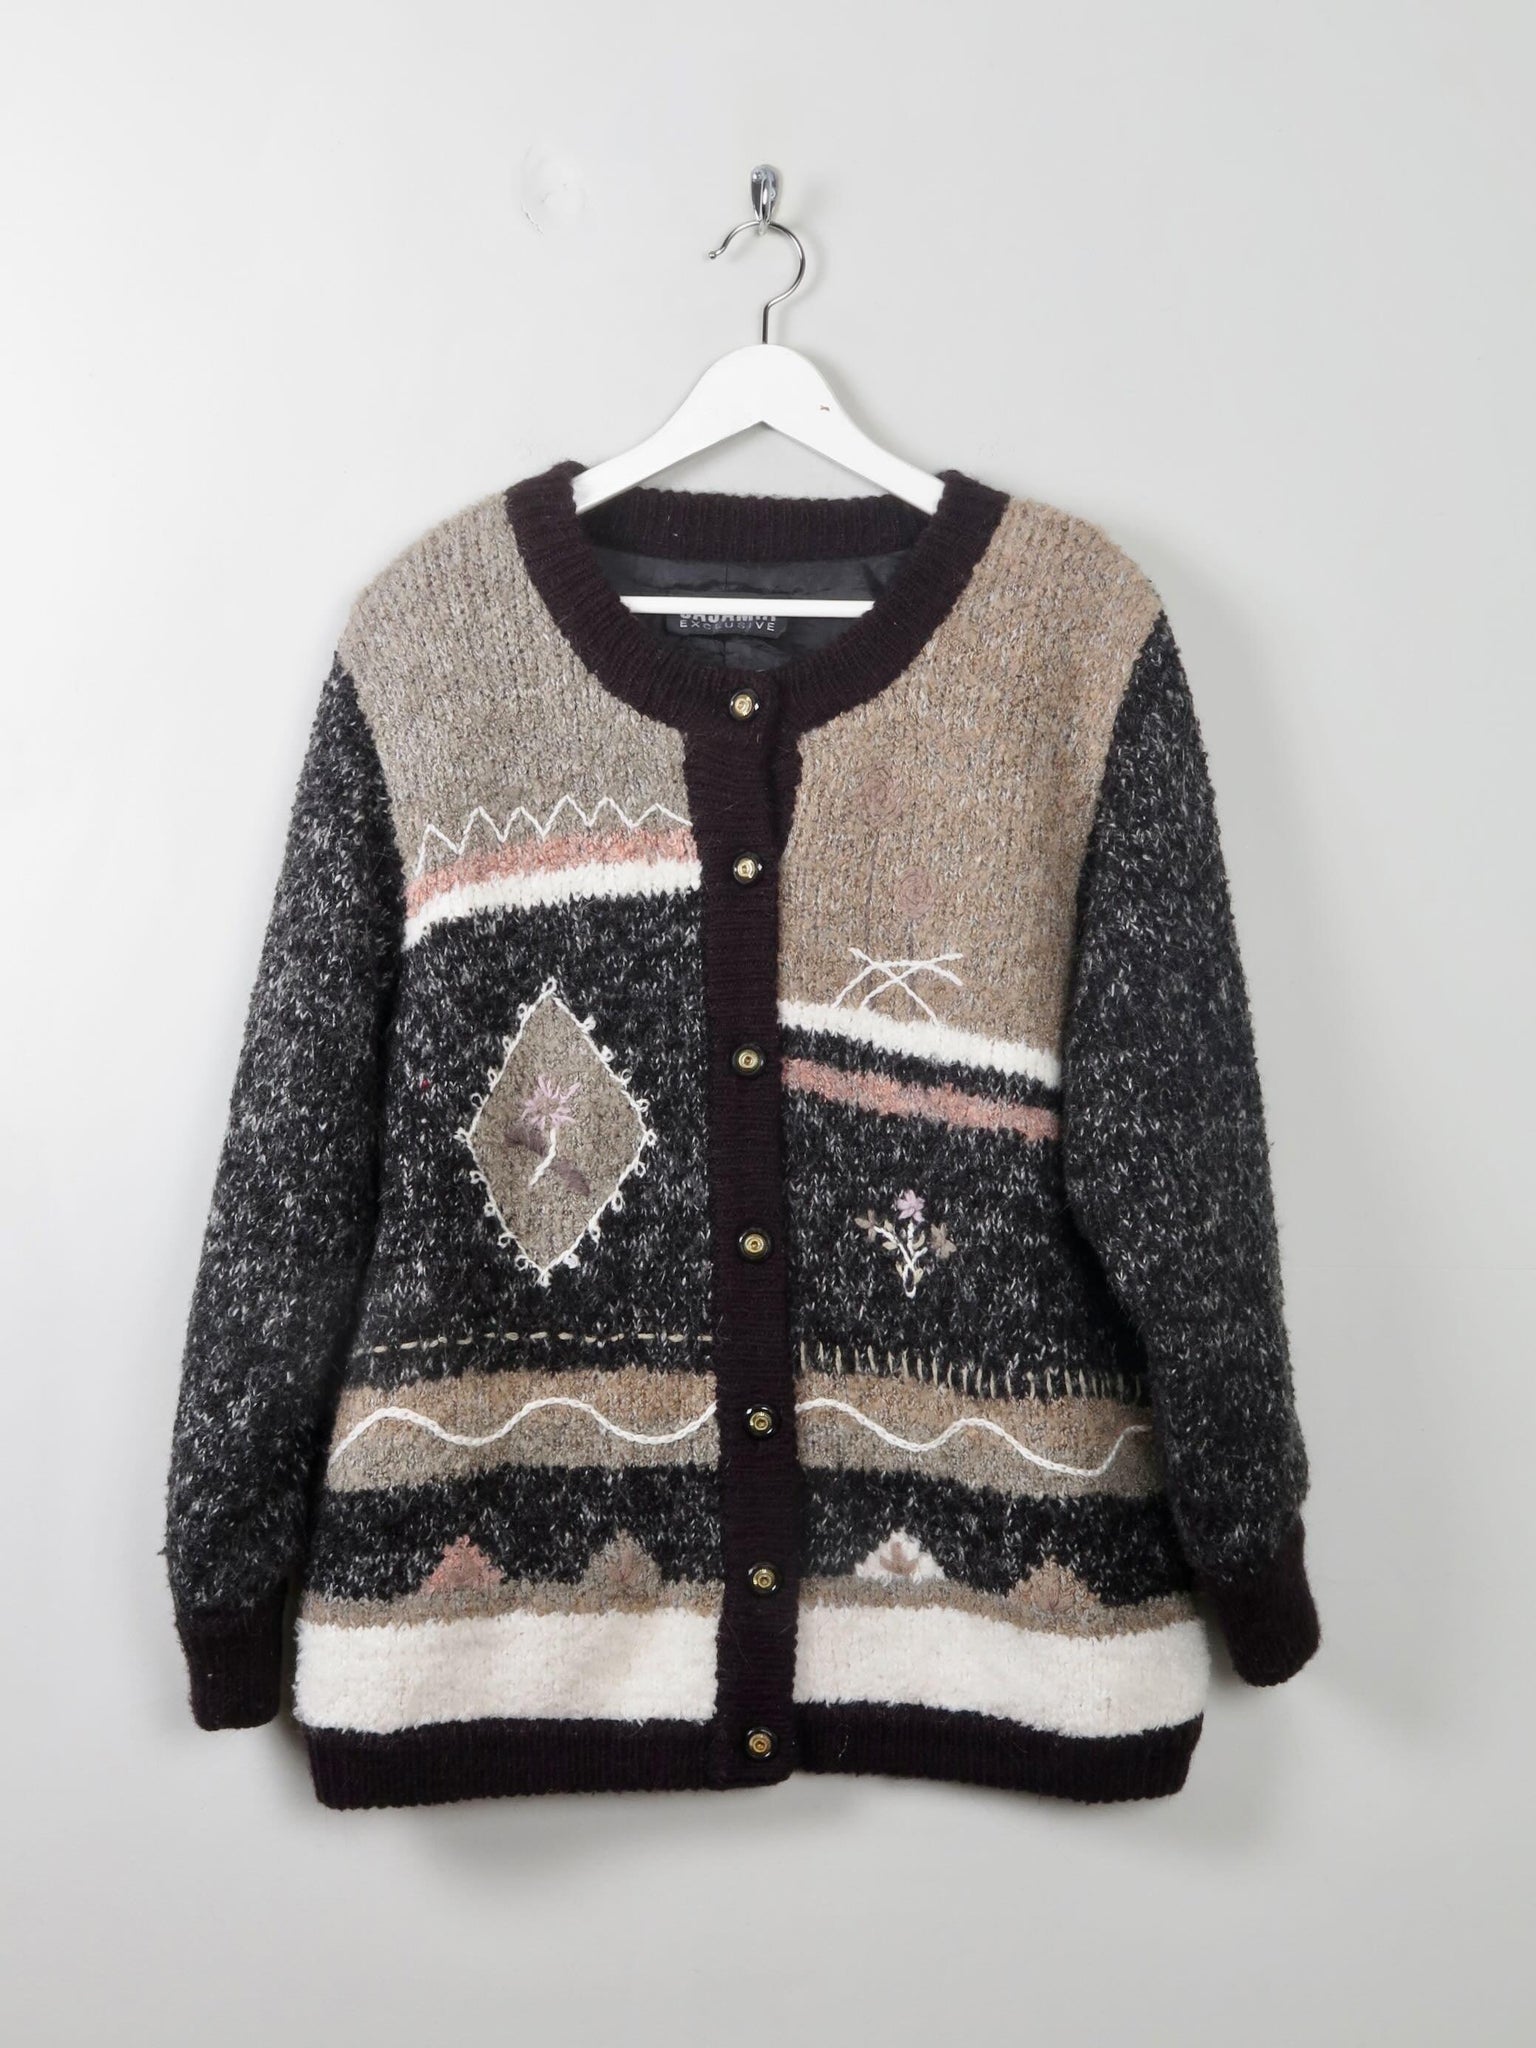 Women's Vintage Lined Wool Cardigan M/L - The Harlequin